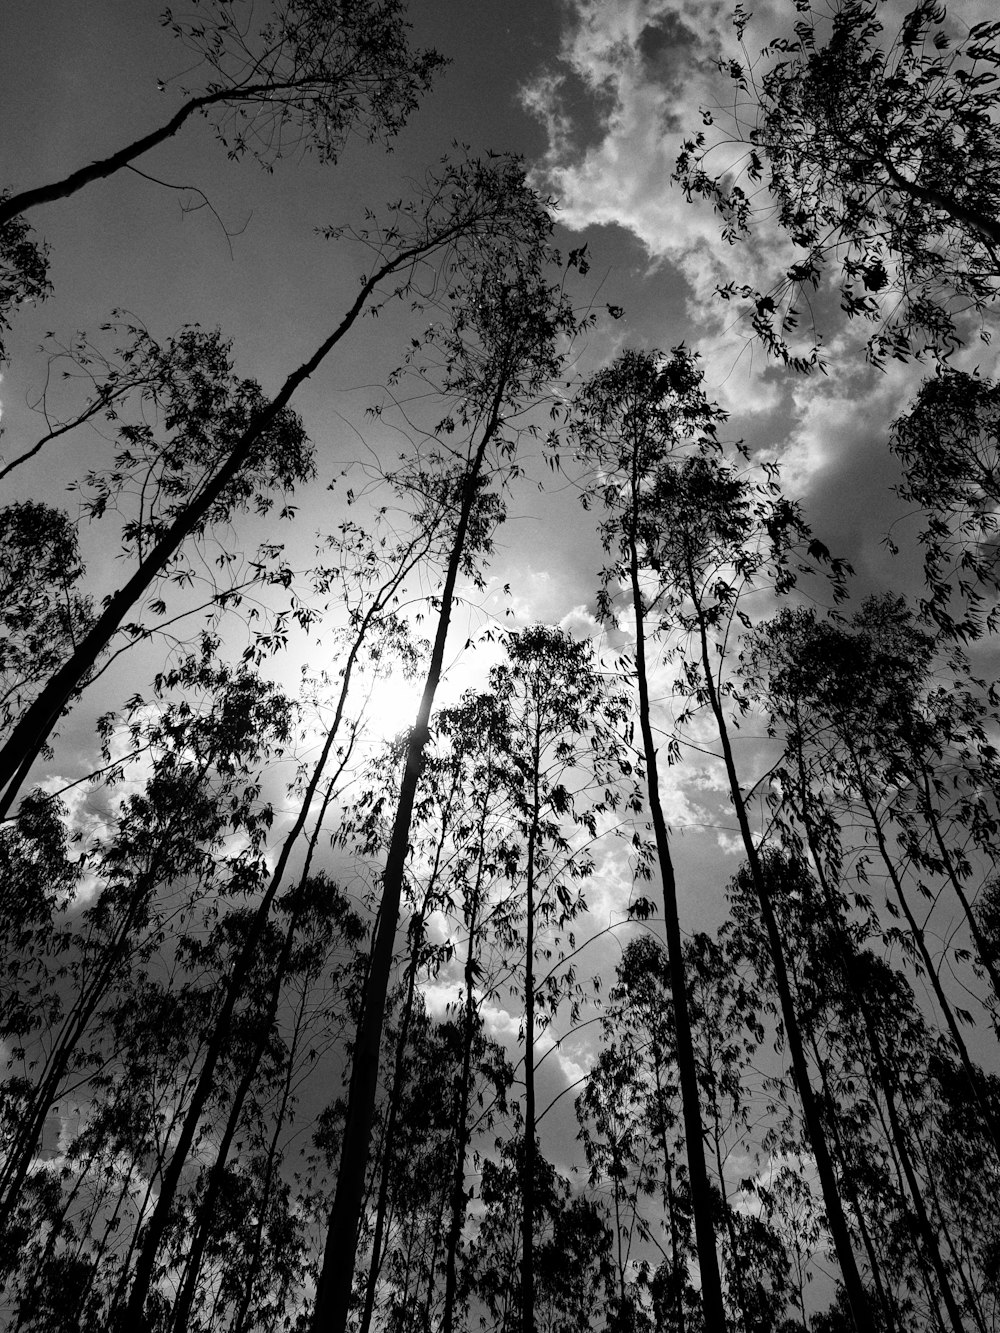 worm view photo of trees under cloudy sky